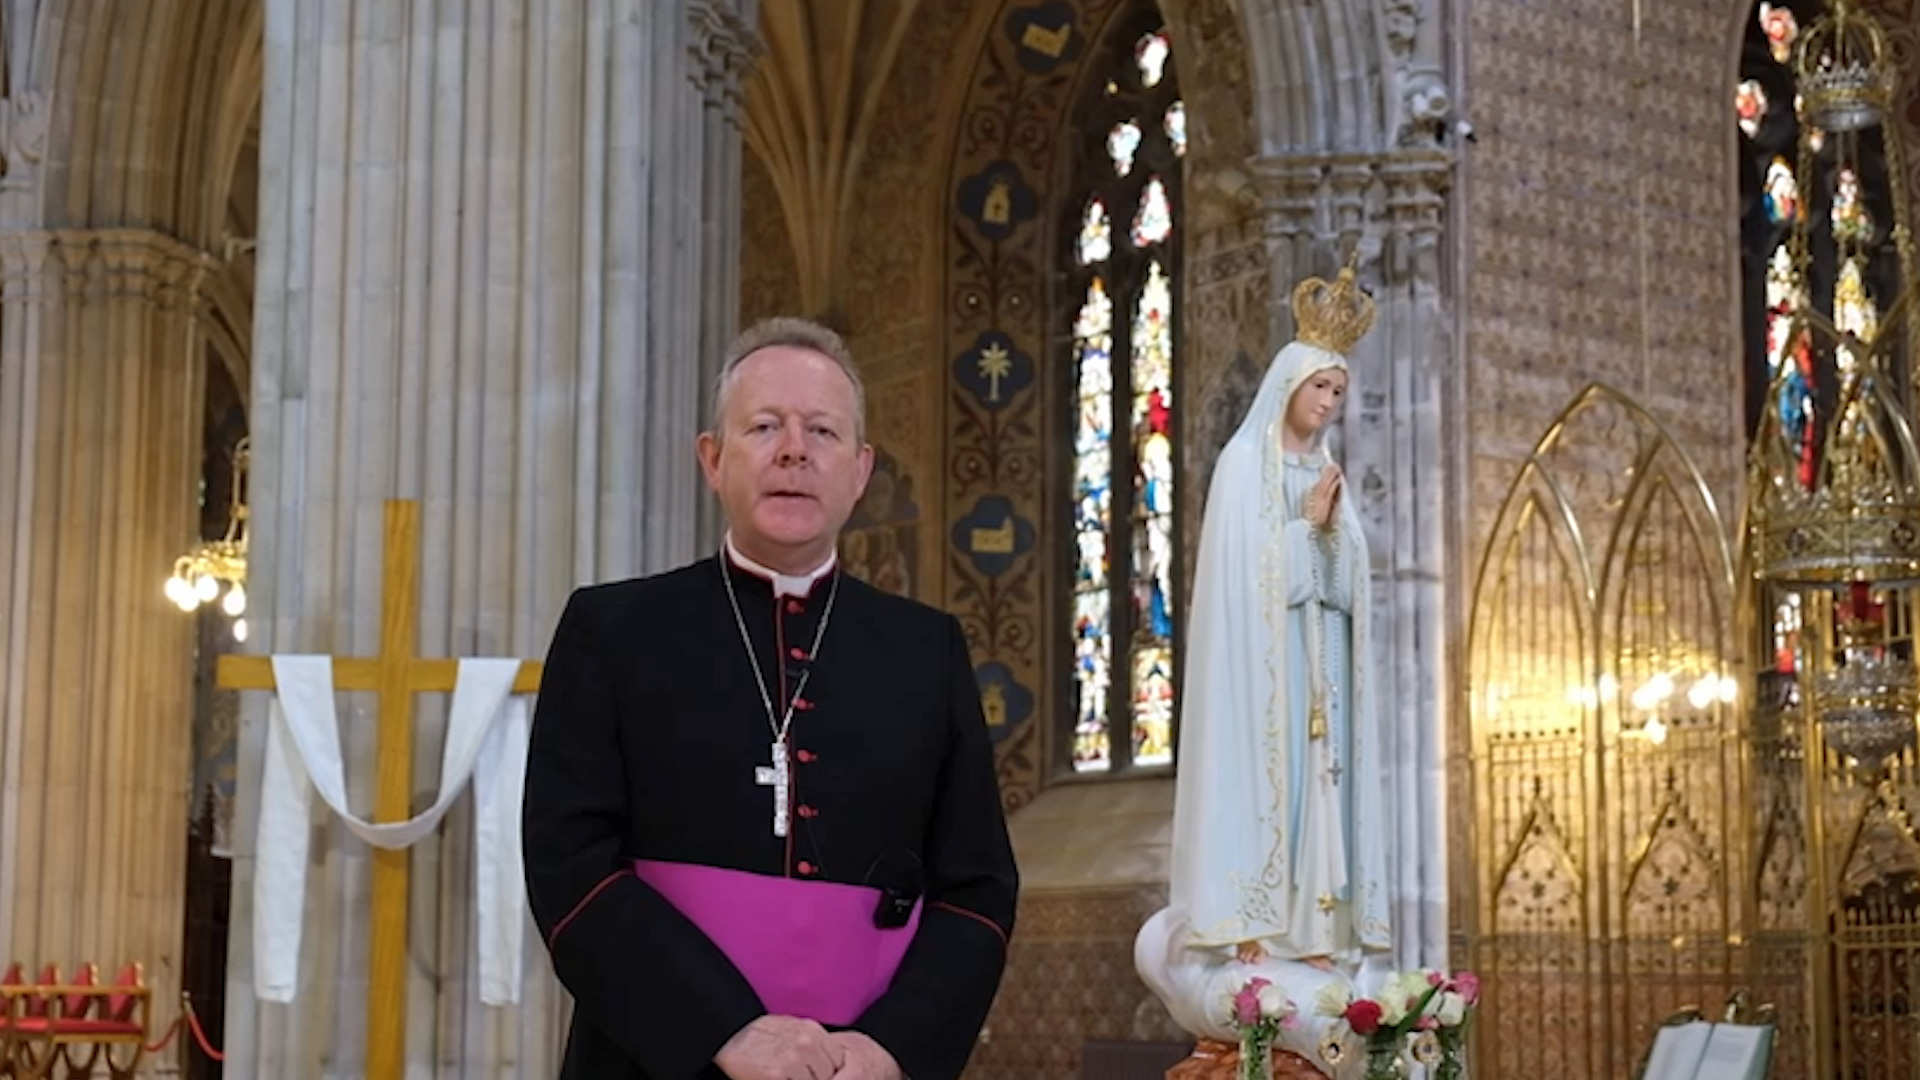 Feast of our Lady of Fatima – Archbishop Eamon Martin